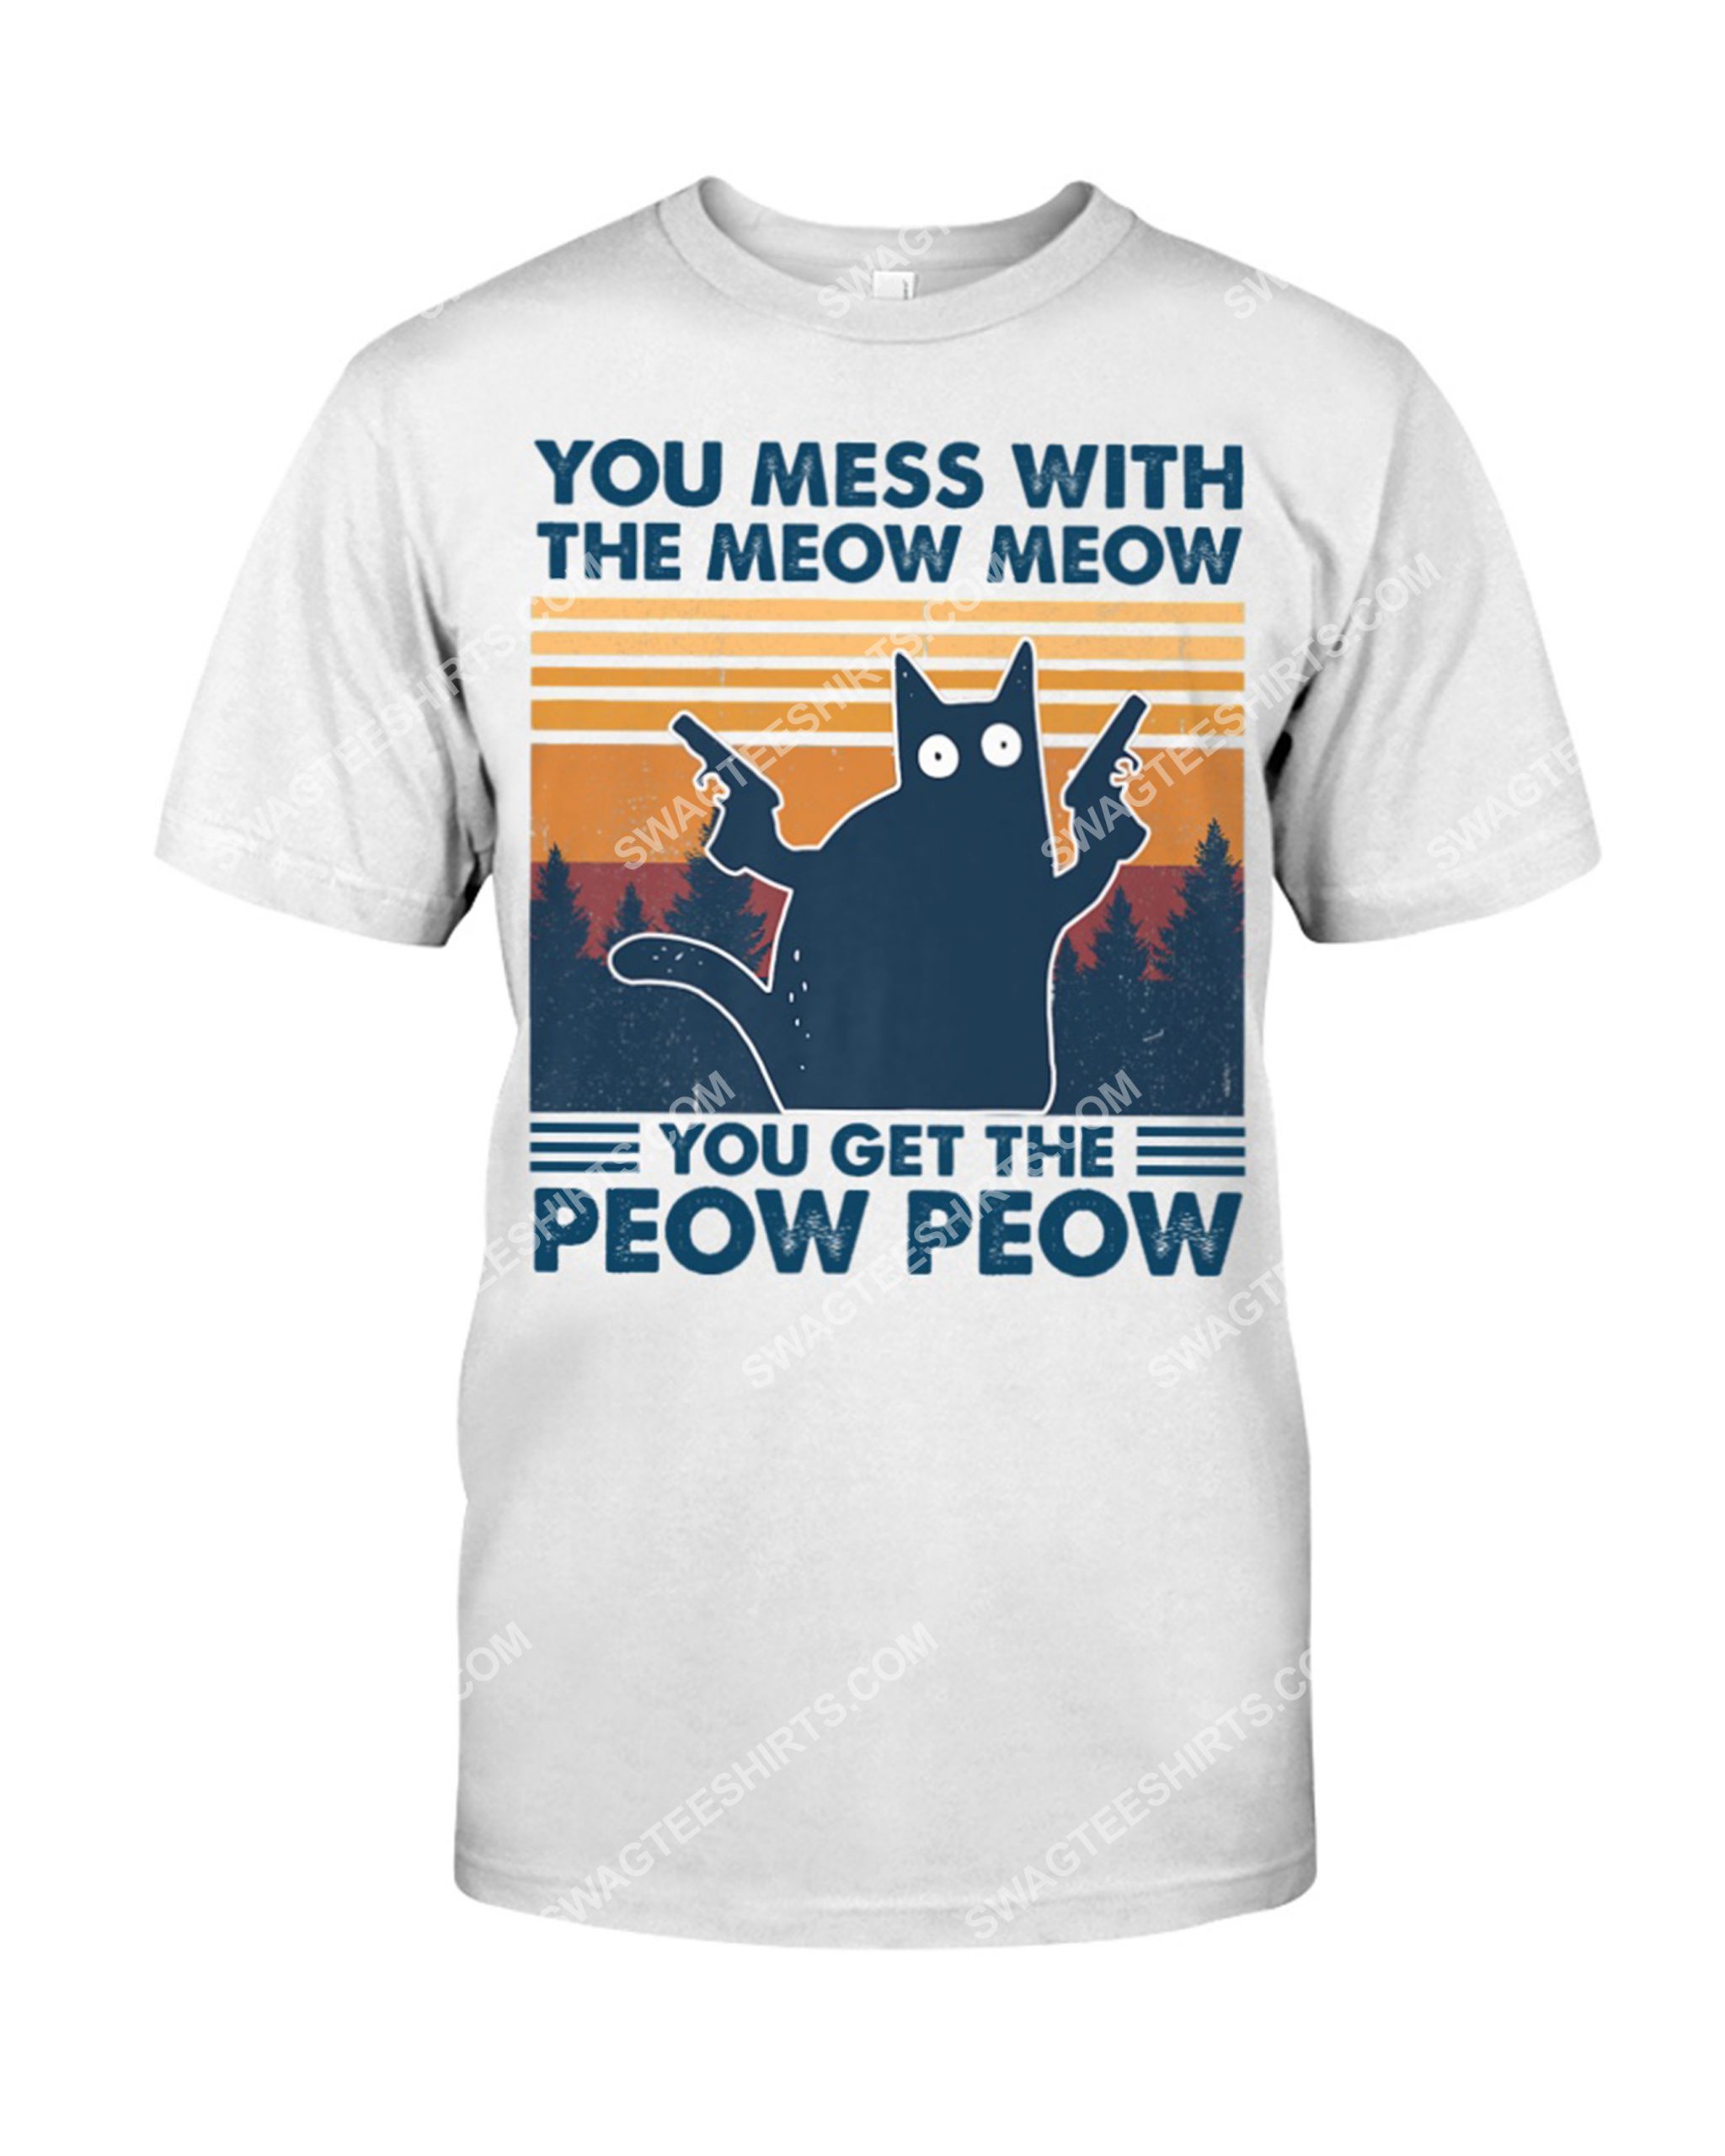 you mess with the meow meow you get the peow peow shirt 1(1)